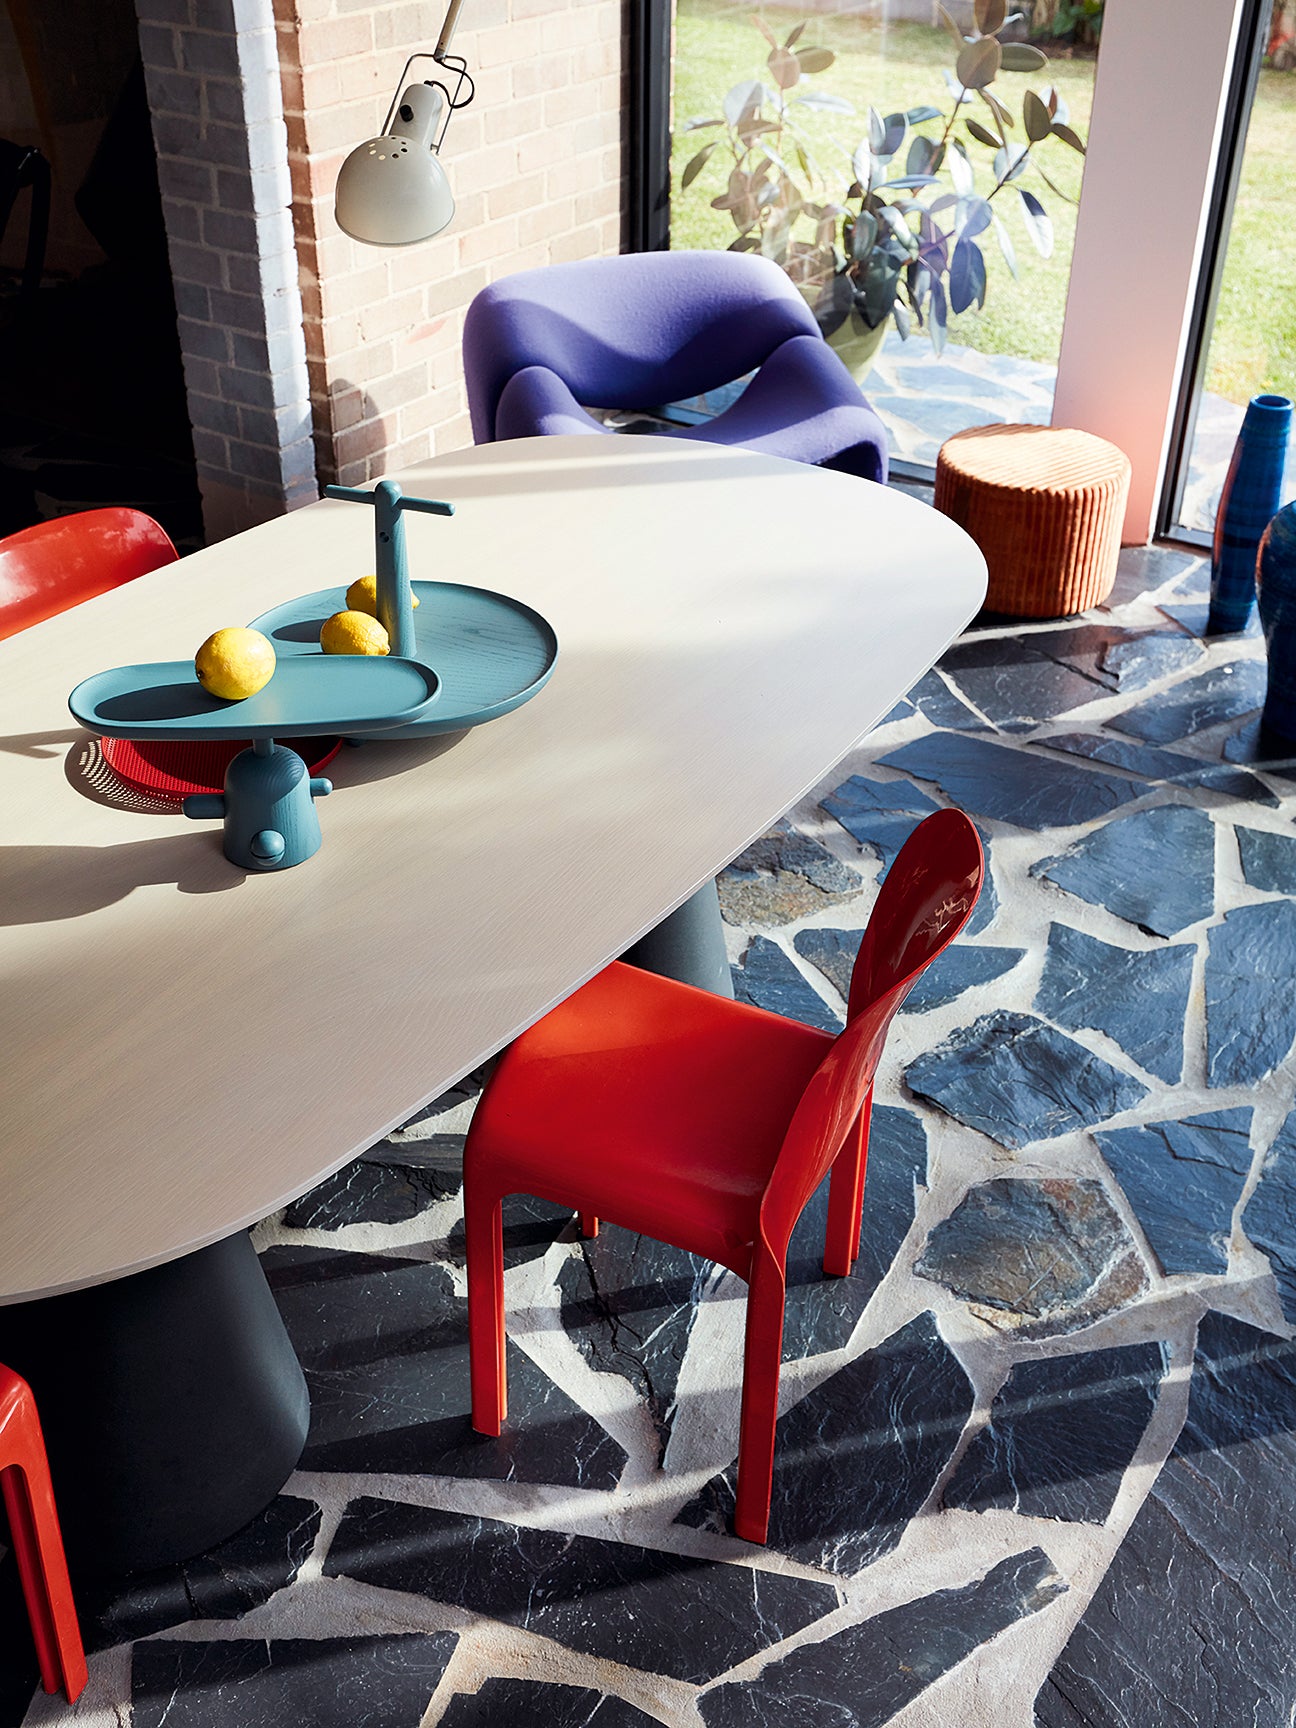 Dark terrazzo floors with red dining chairs